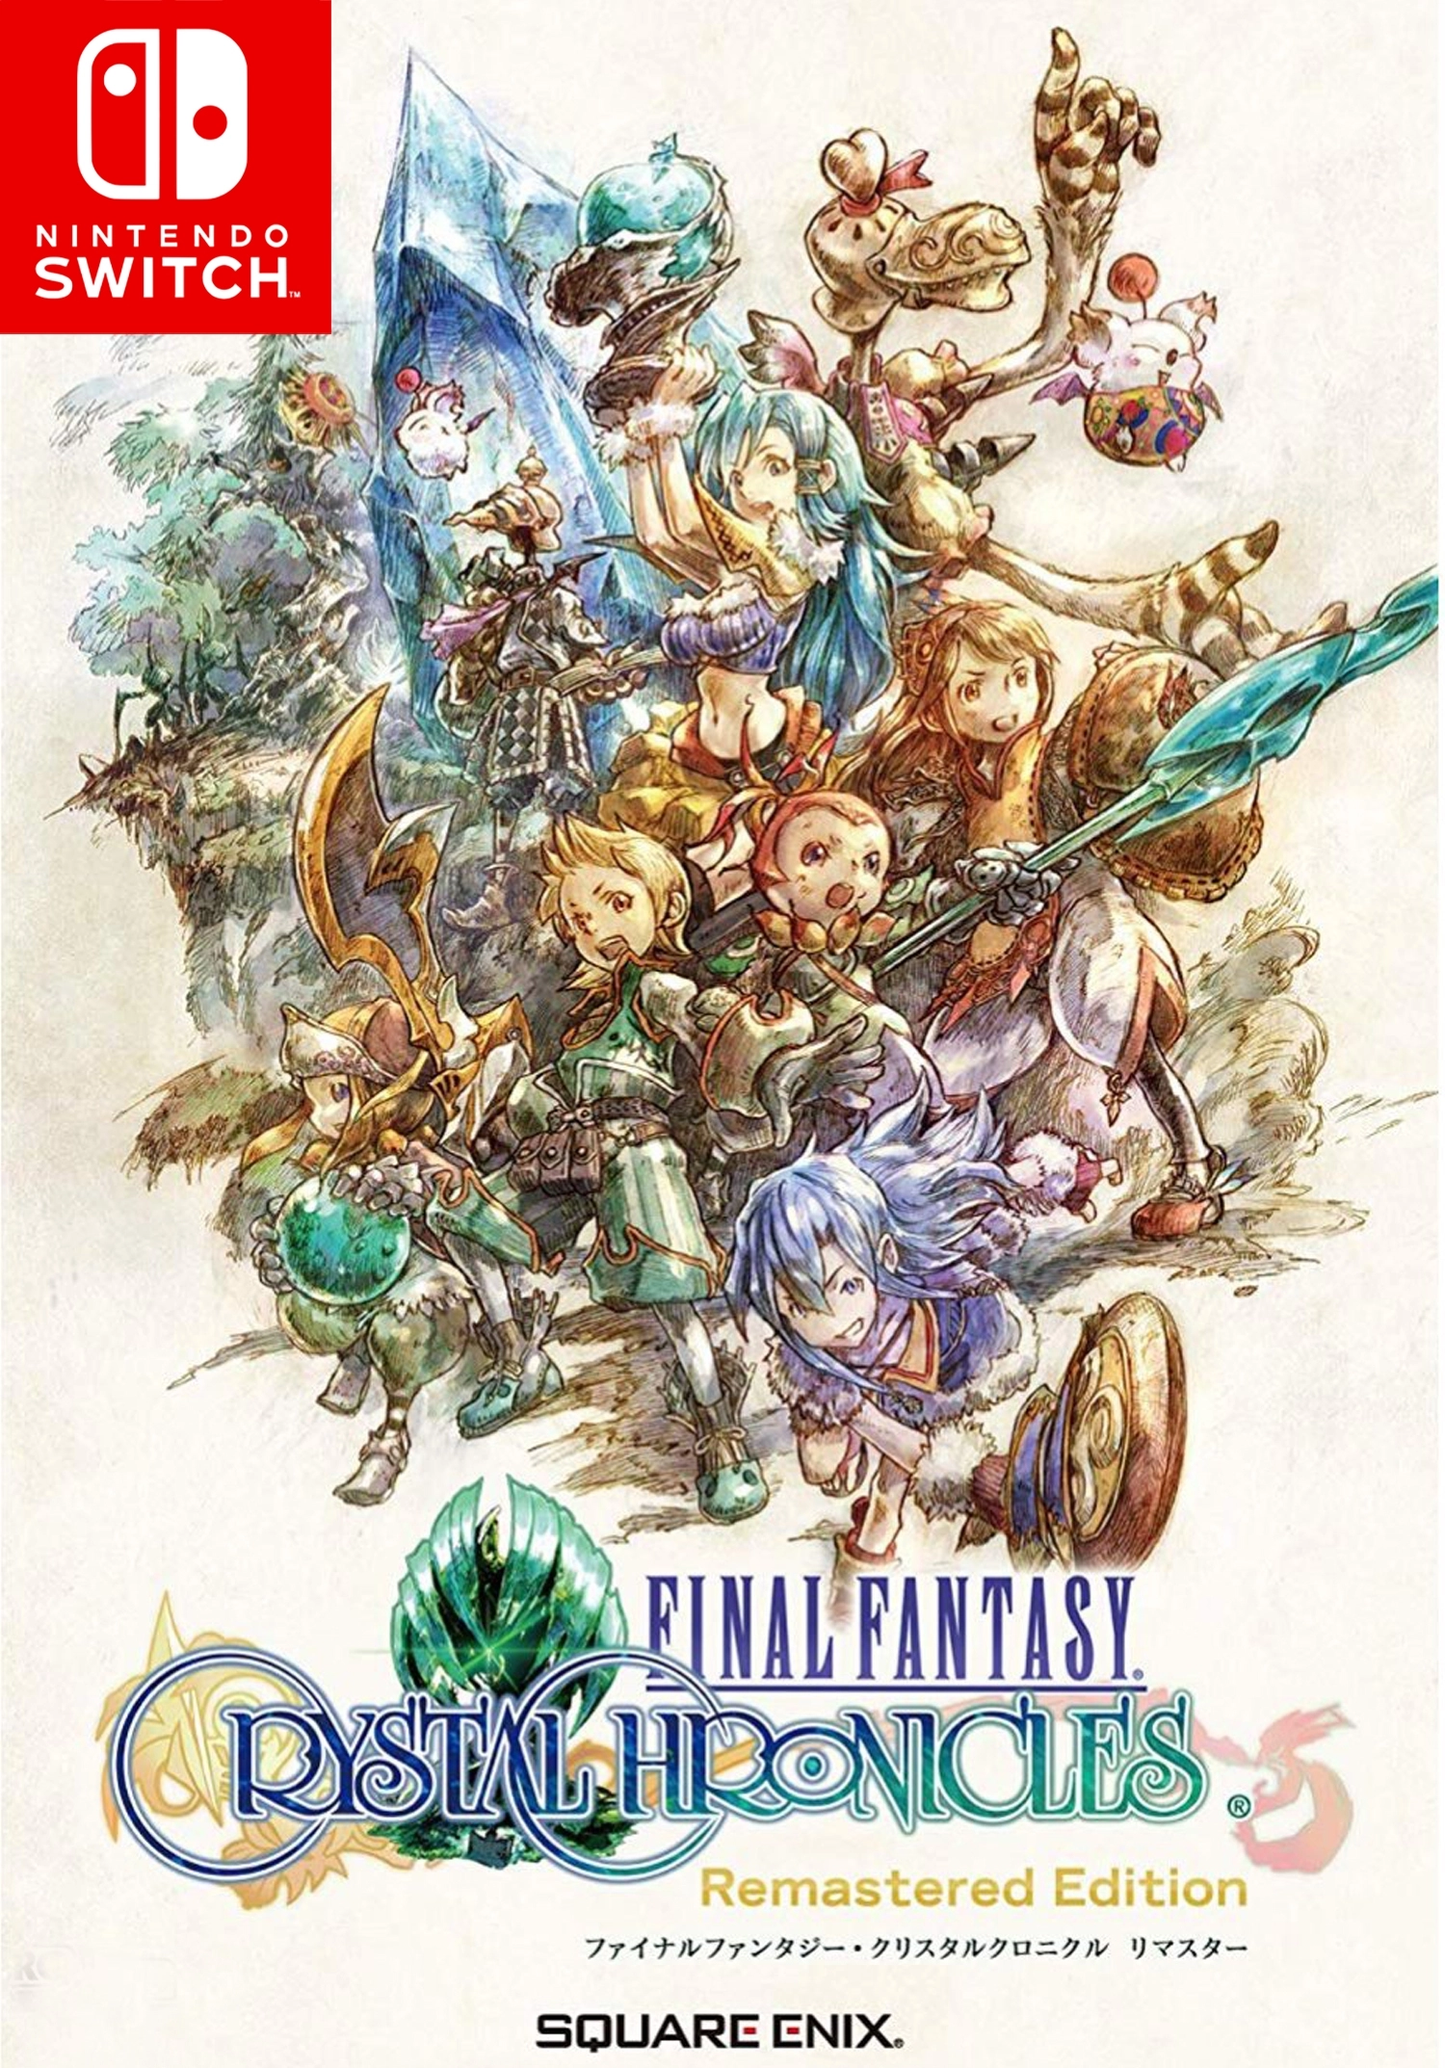 [Switch Save Progression] - Final Fantasy Crystal Chronicles Remastered Edition - Super Starter Save/Mod/Max Akirac Other Mods Seasonal and Non Seasonal Save Mod - Modded Items and Gear - Hacks - Cheats - Trainers for Playstation 4 - Playstation 5 - Nintendo Switch - Xbox One